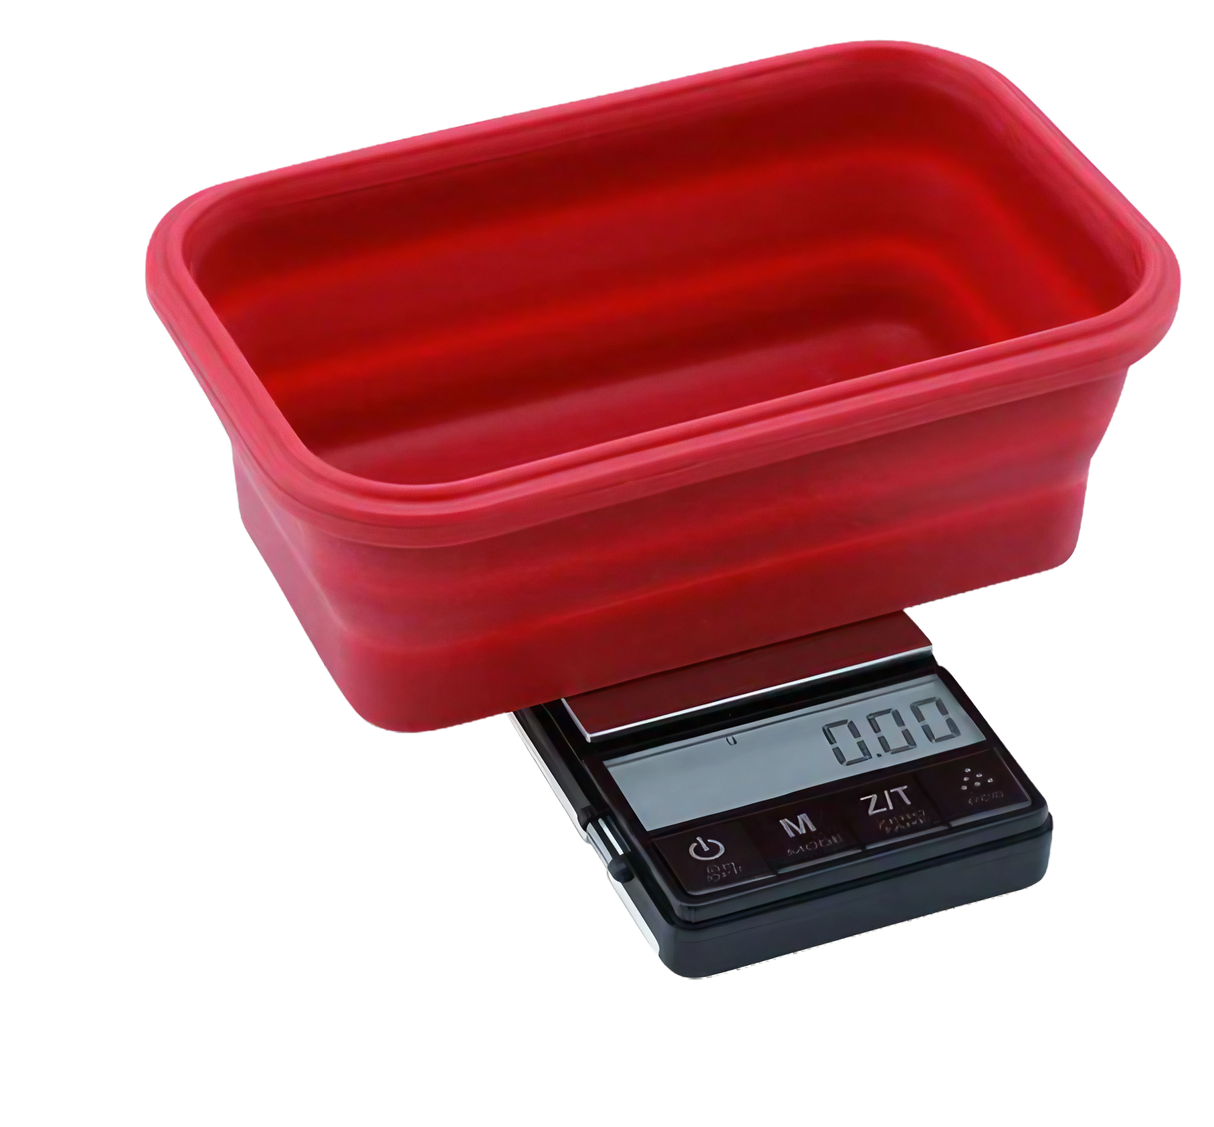 Truweigh Crimson Collapsible Silicone Bowl Scale, 200g x 0.01g, Front View on Striped Surface